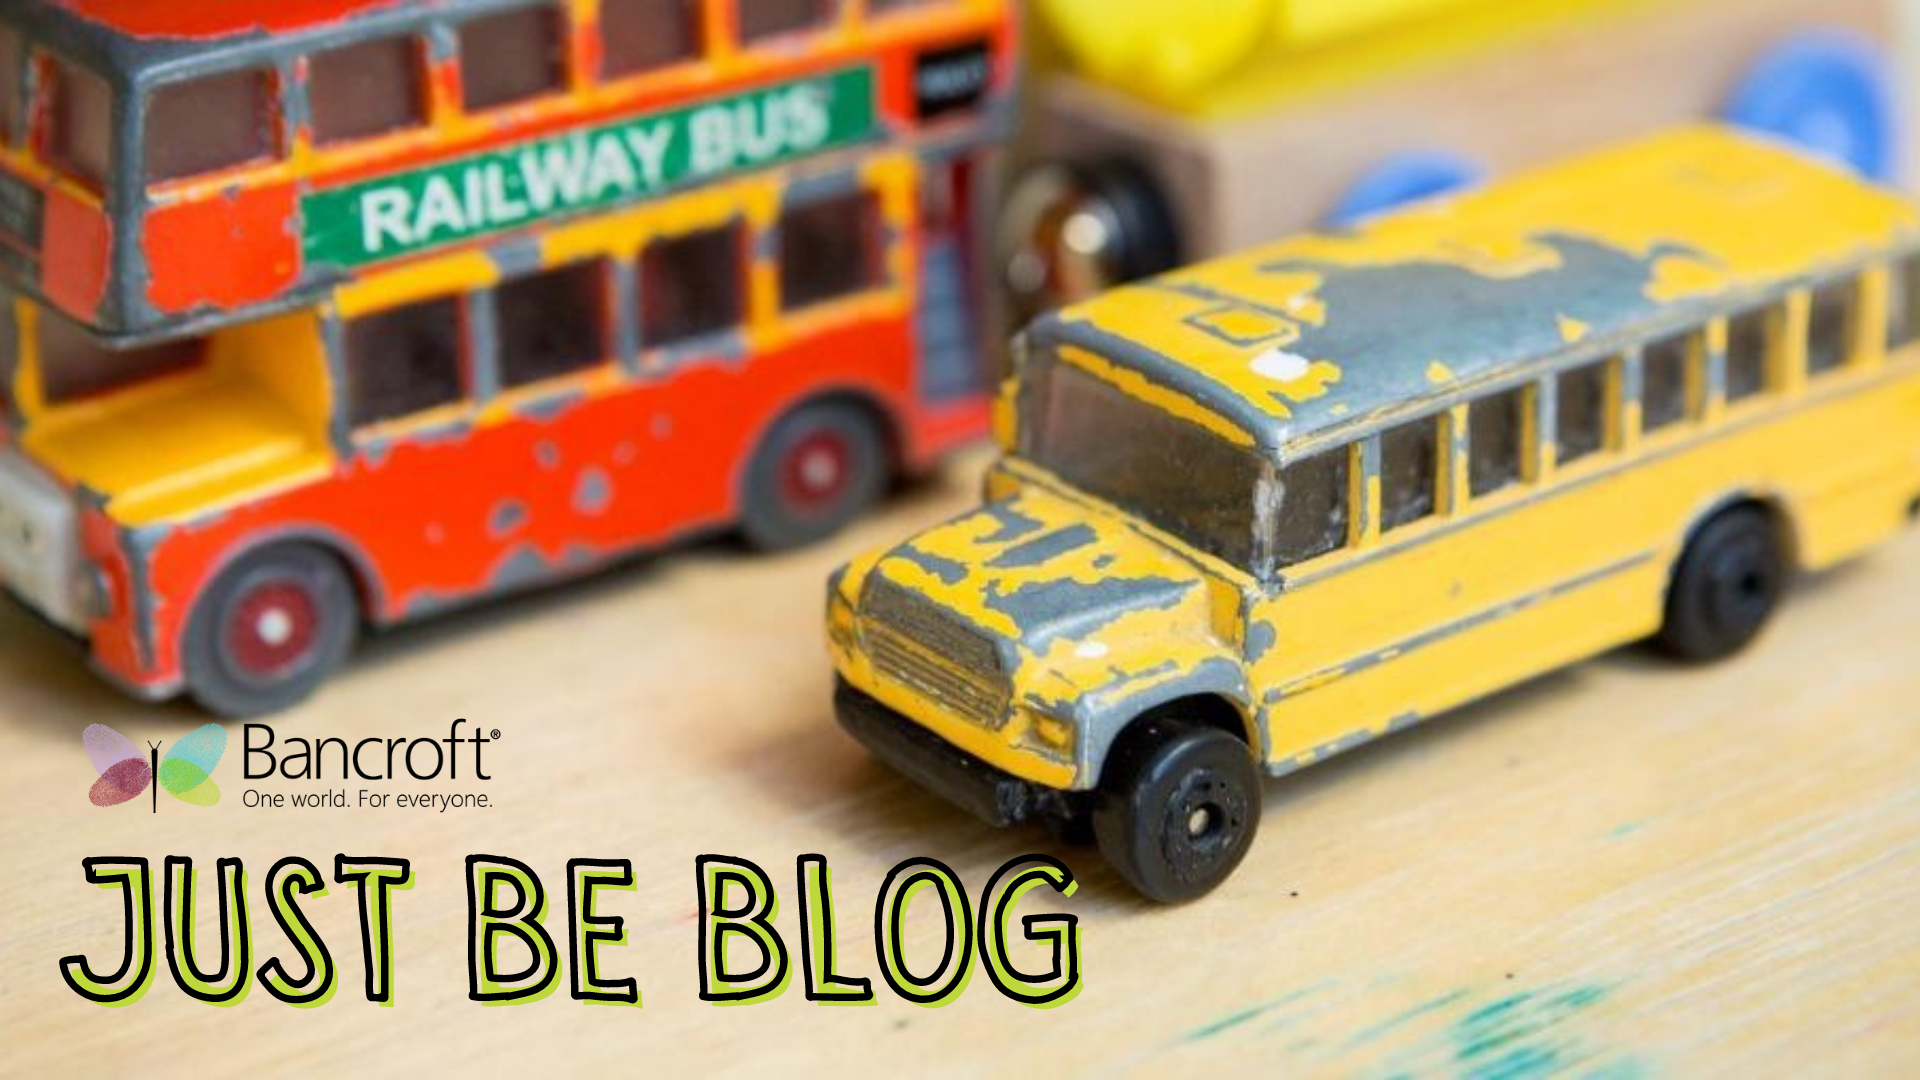 Toy busses, one a red double-decker bus and the other a yellow school bus, sit on a table with the caption "Just Be Blog" in yellow letters with a black outline